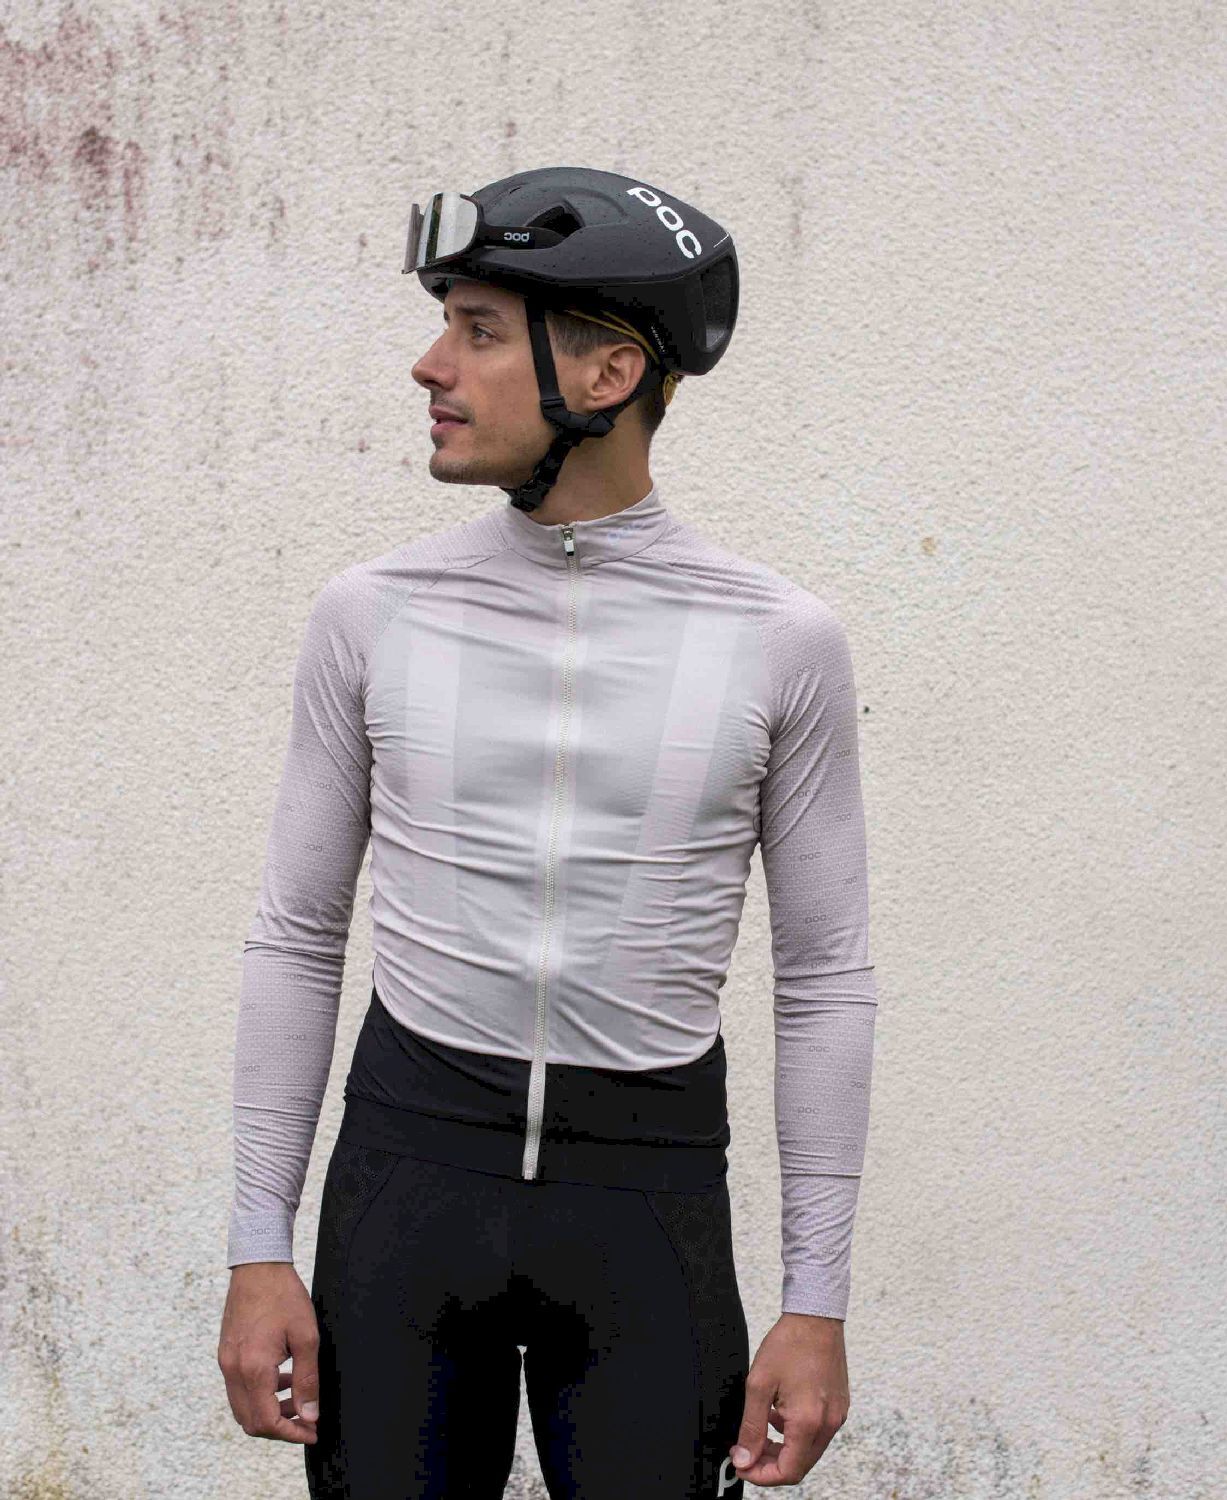 Poc Essential Road LS jersey - Cycling jersey - Men's